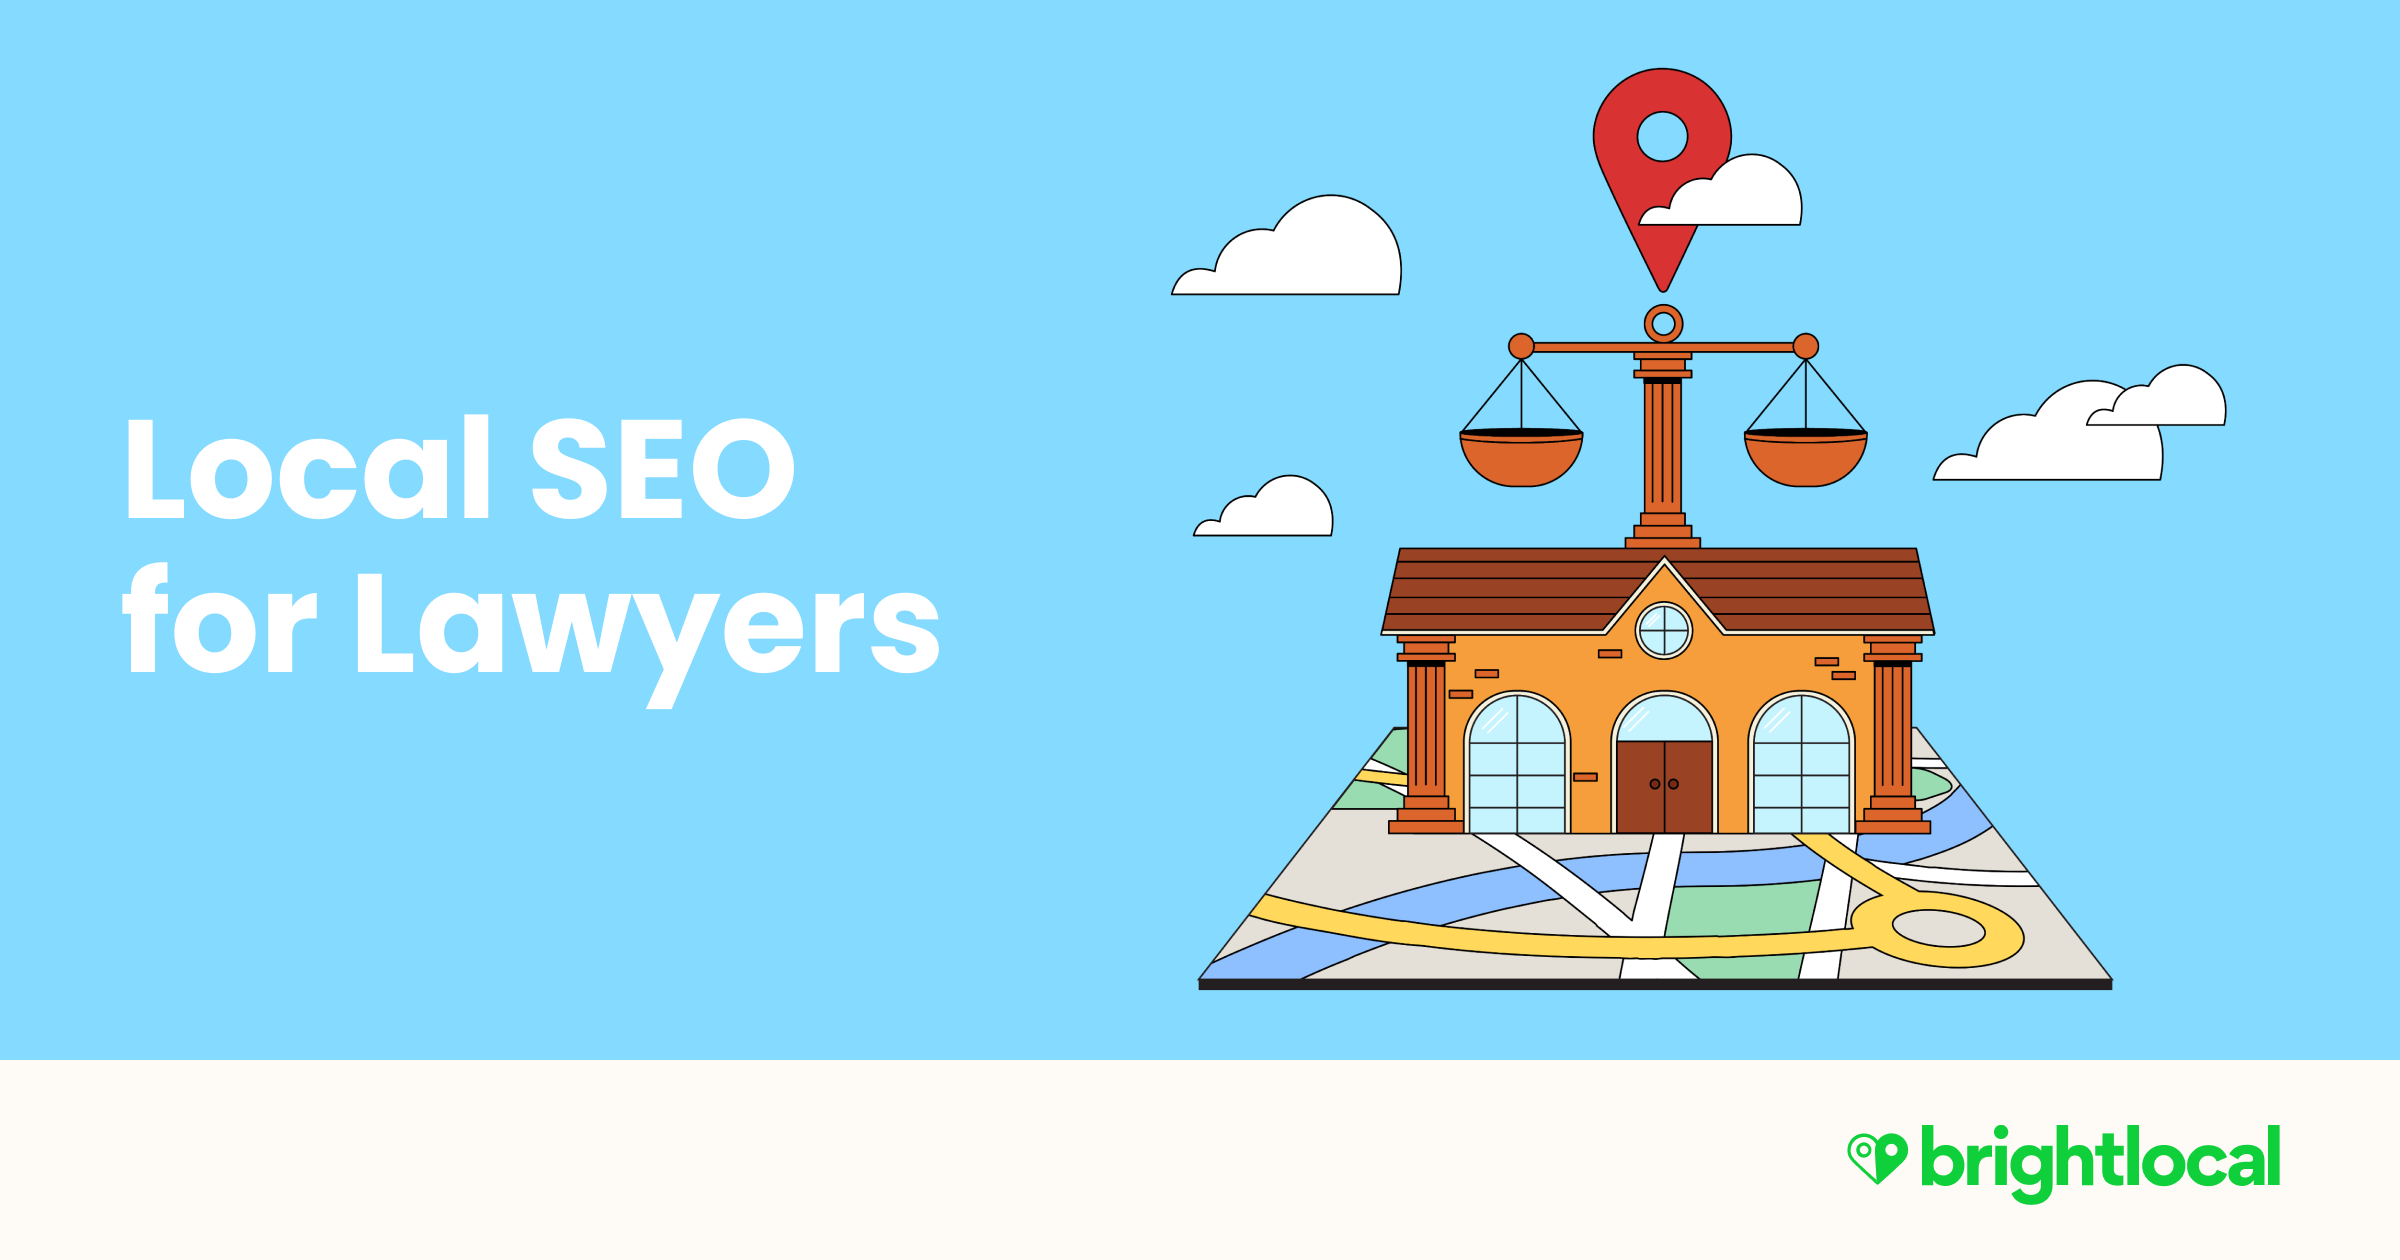 How to Do Local SEO for Lawyers